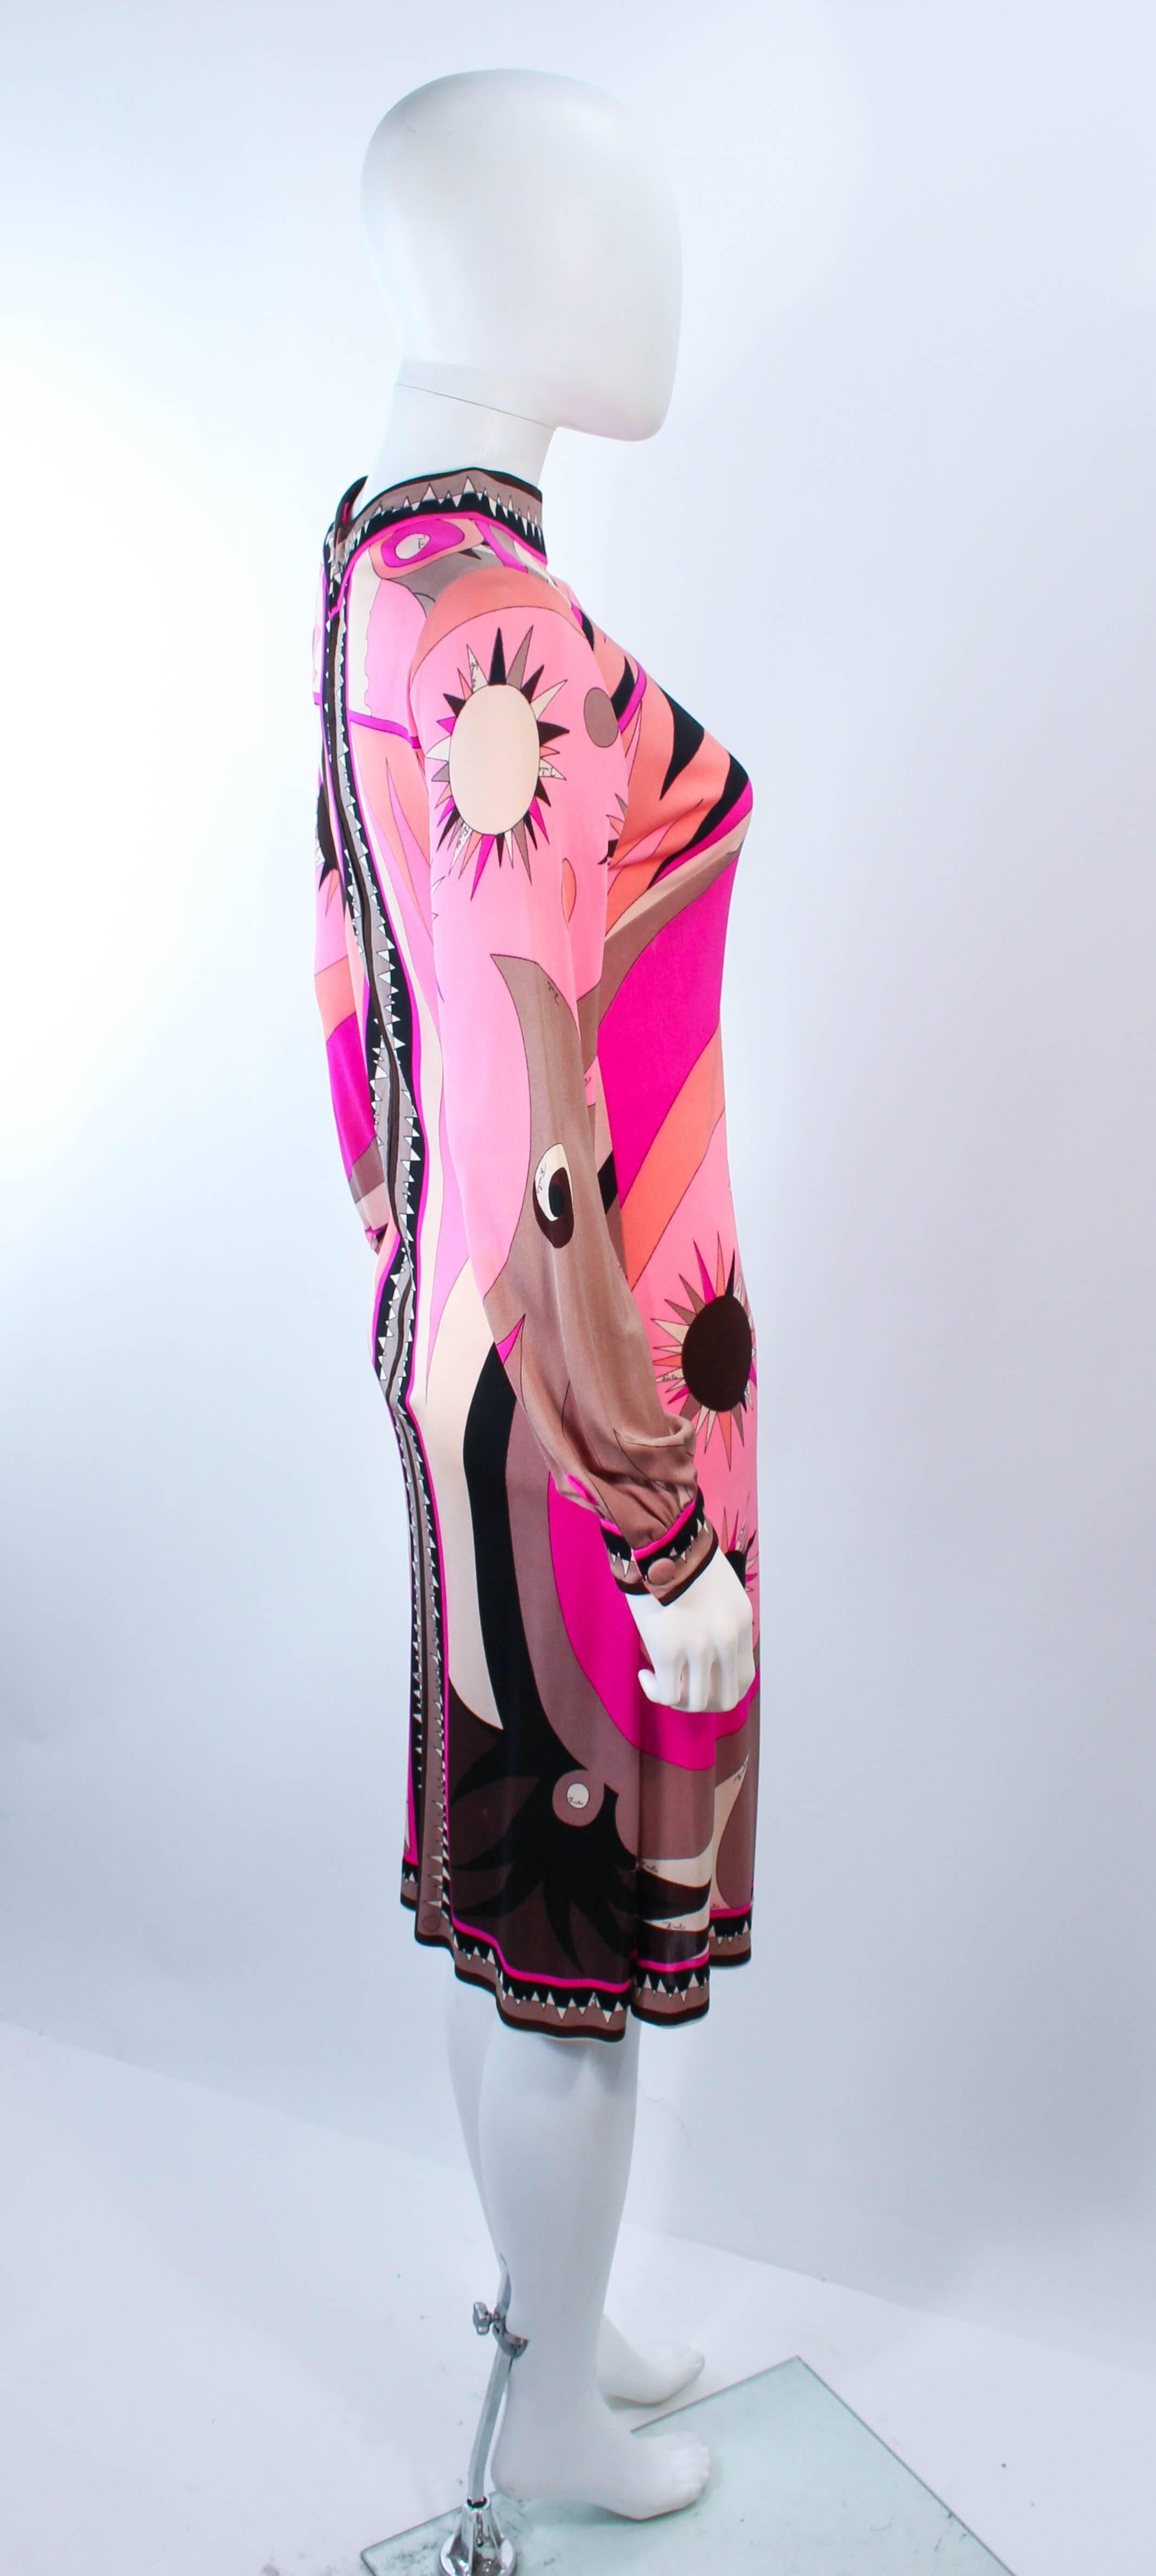 EMILIO PUCCI 1960's Pink Abstract Print Stretch Dress Size 4 6  3